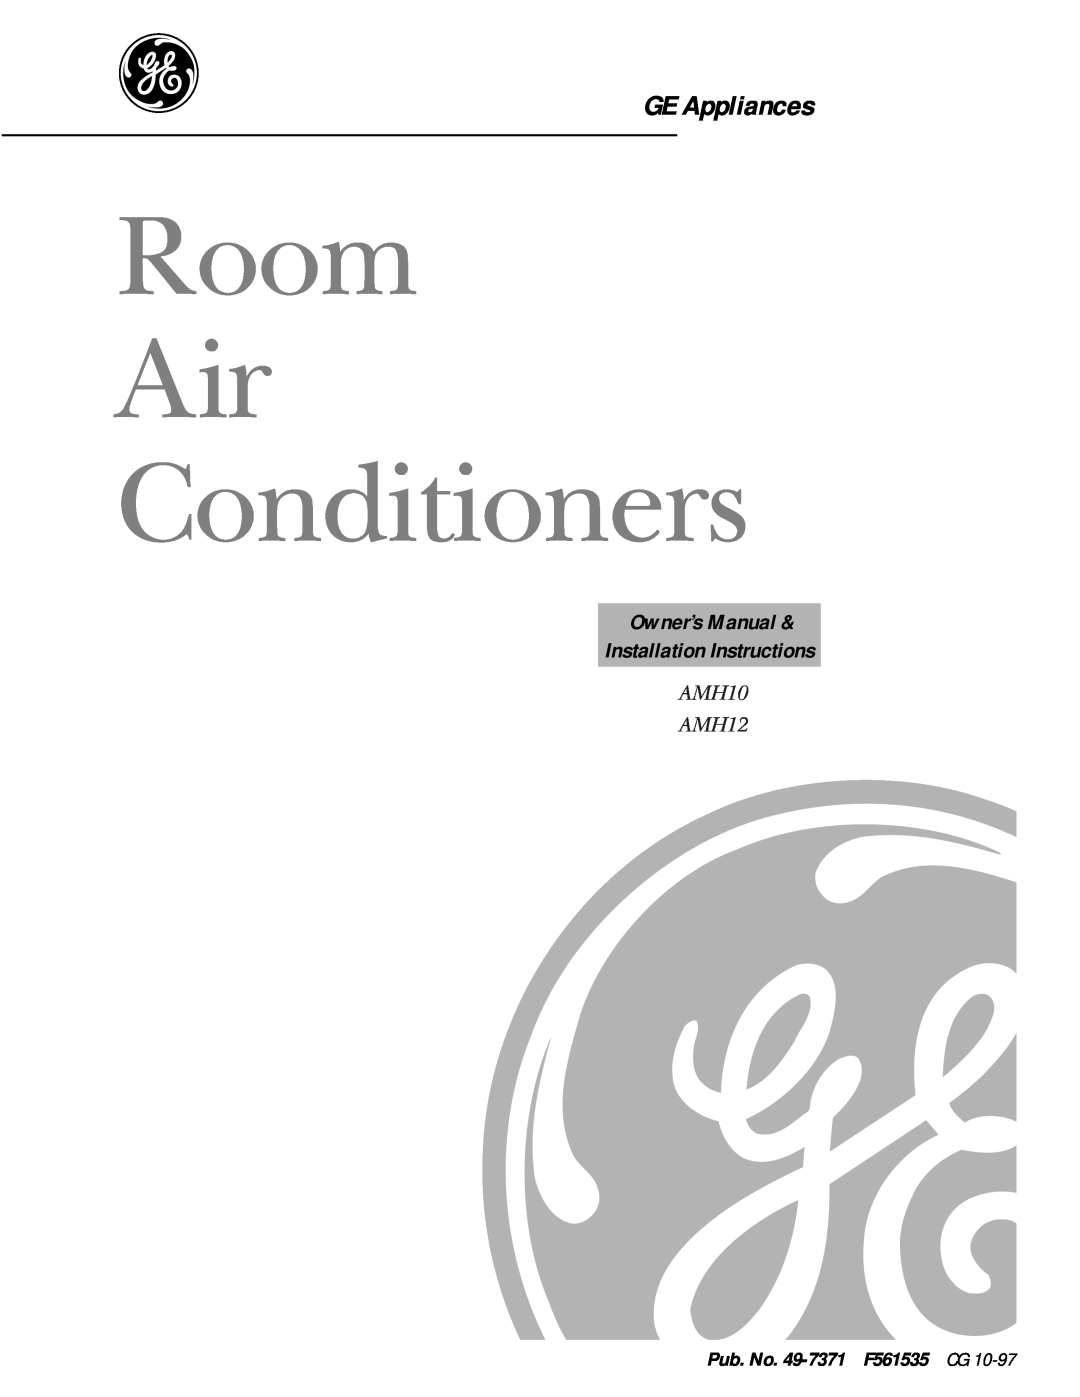 GE owner manual Pub. No. 49-7371F561535 CG, Room Air Conditioners, GE Appliances, AMH10 AMH12 